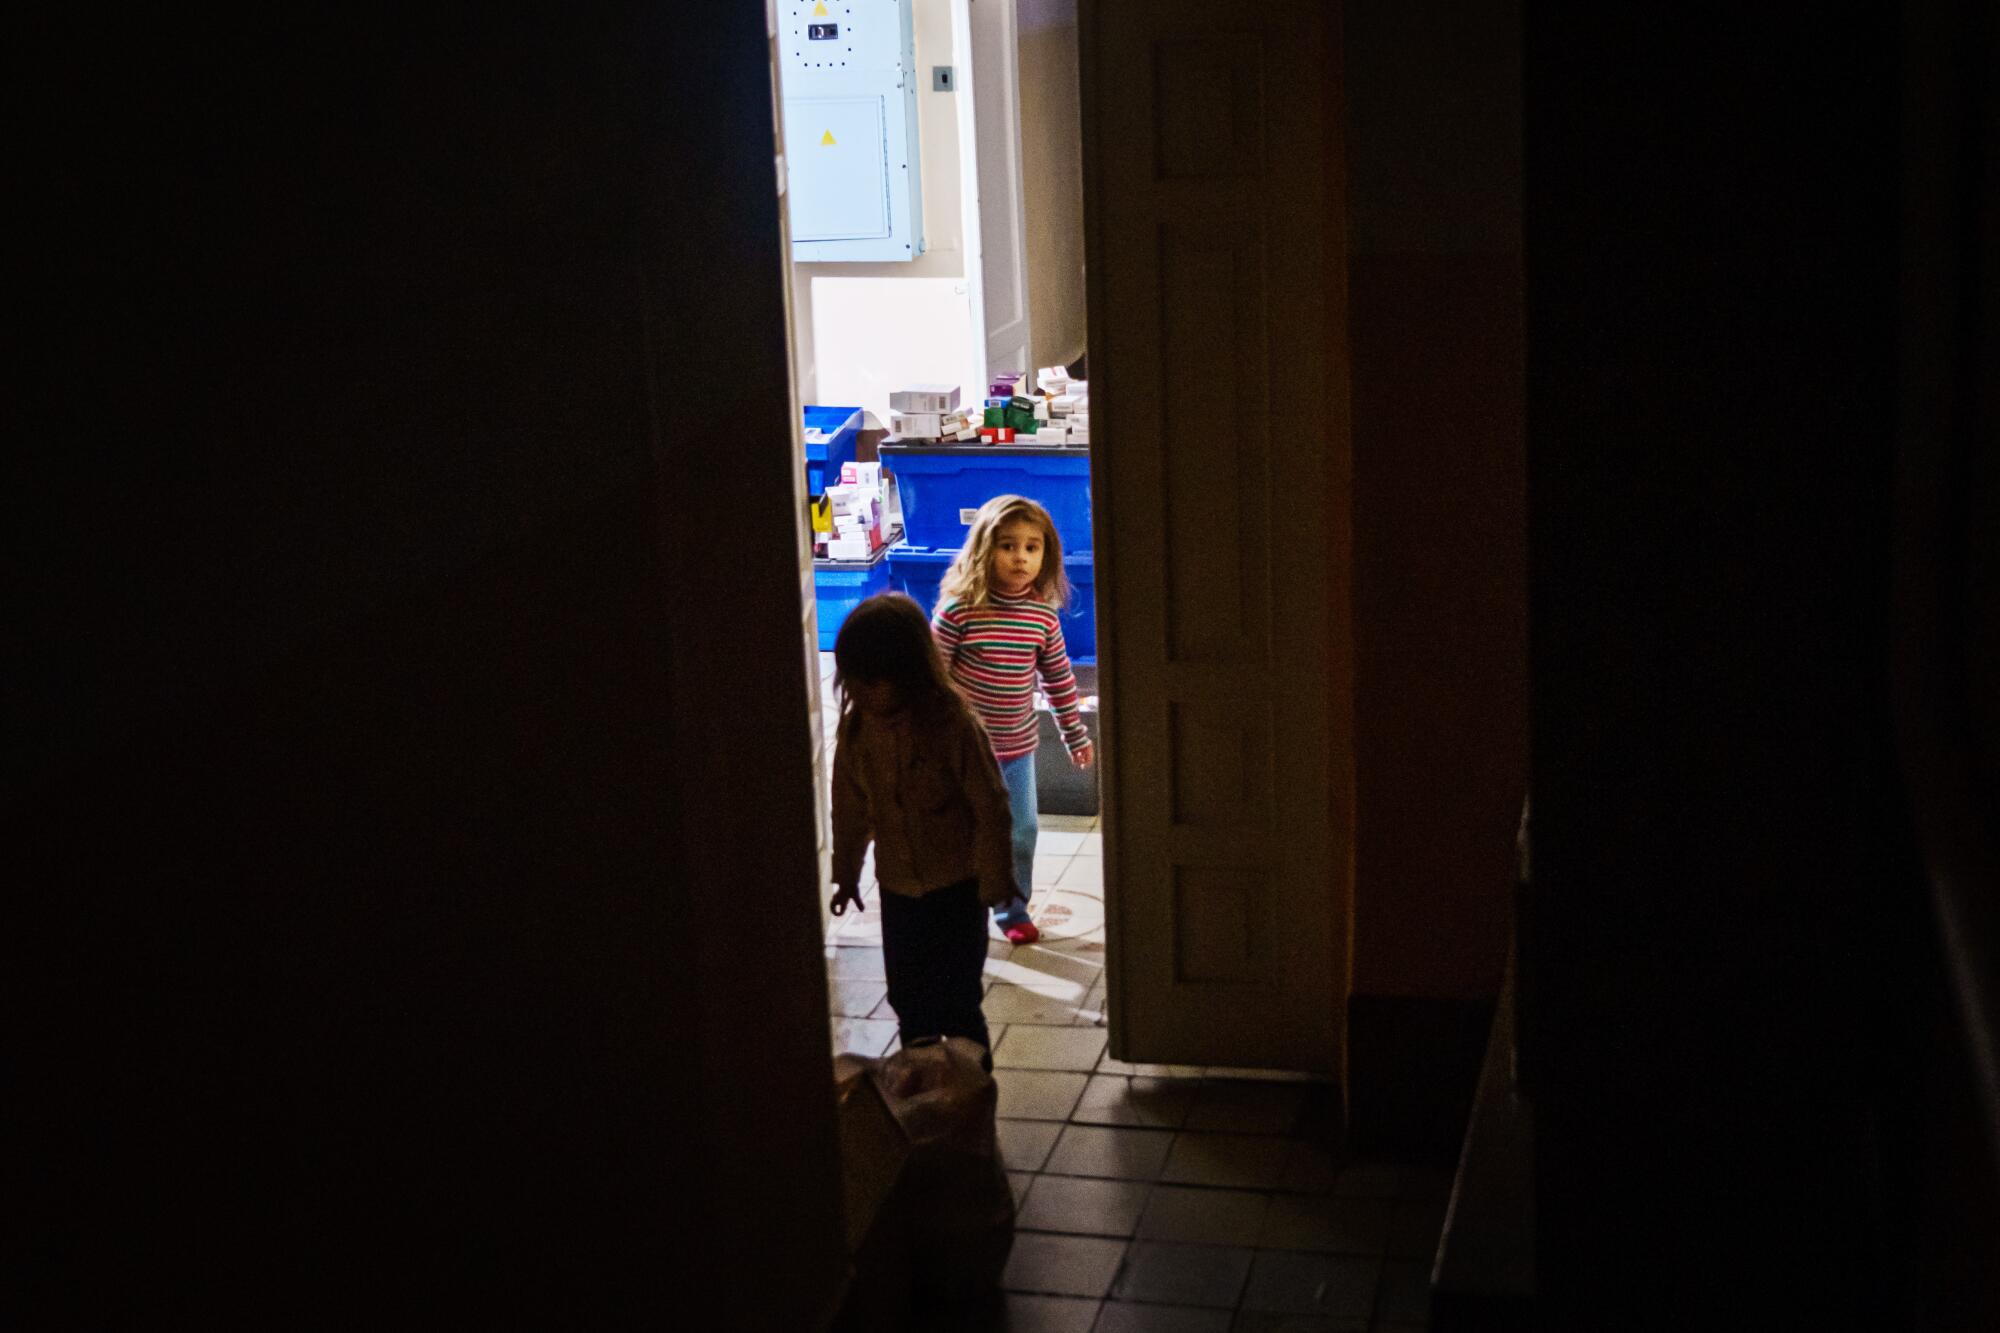 Two young girls are seen in a lighted doorway.